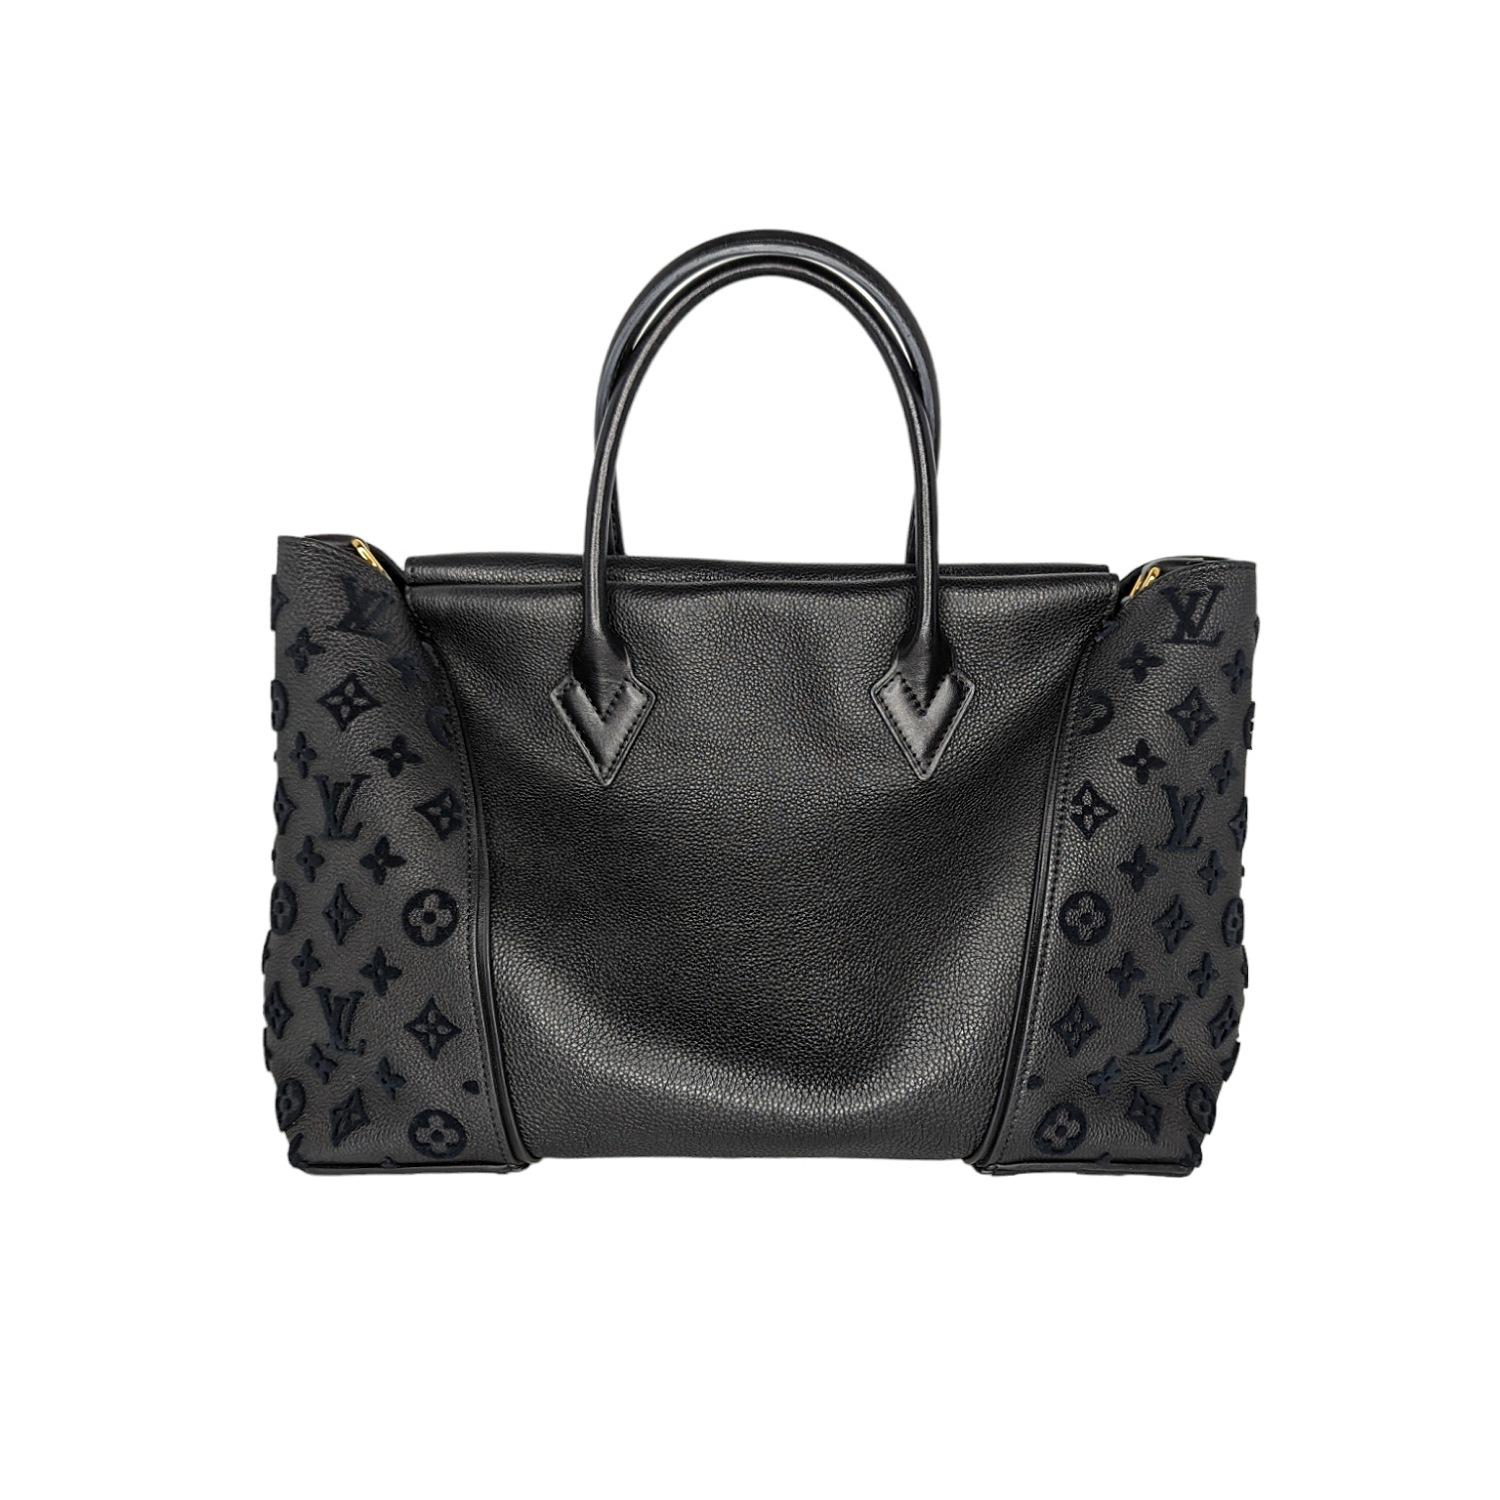 This luxurious and elegant handbag is finely crafted in black hue and features the monogram pattern in velvet on the sides. The top is secured with hidden magnetic closures, and opens to a roomy suede interior with two hanging zippered